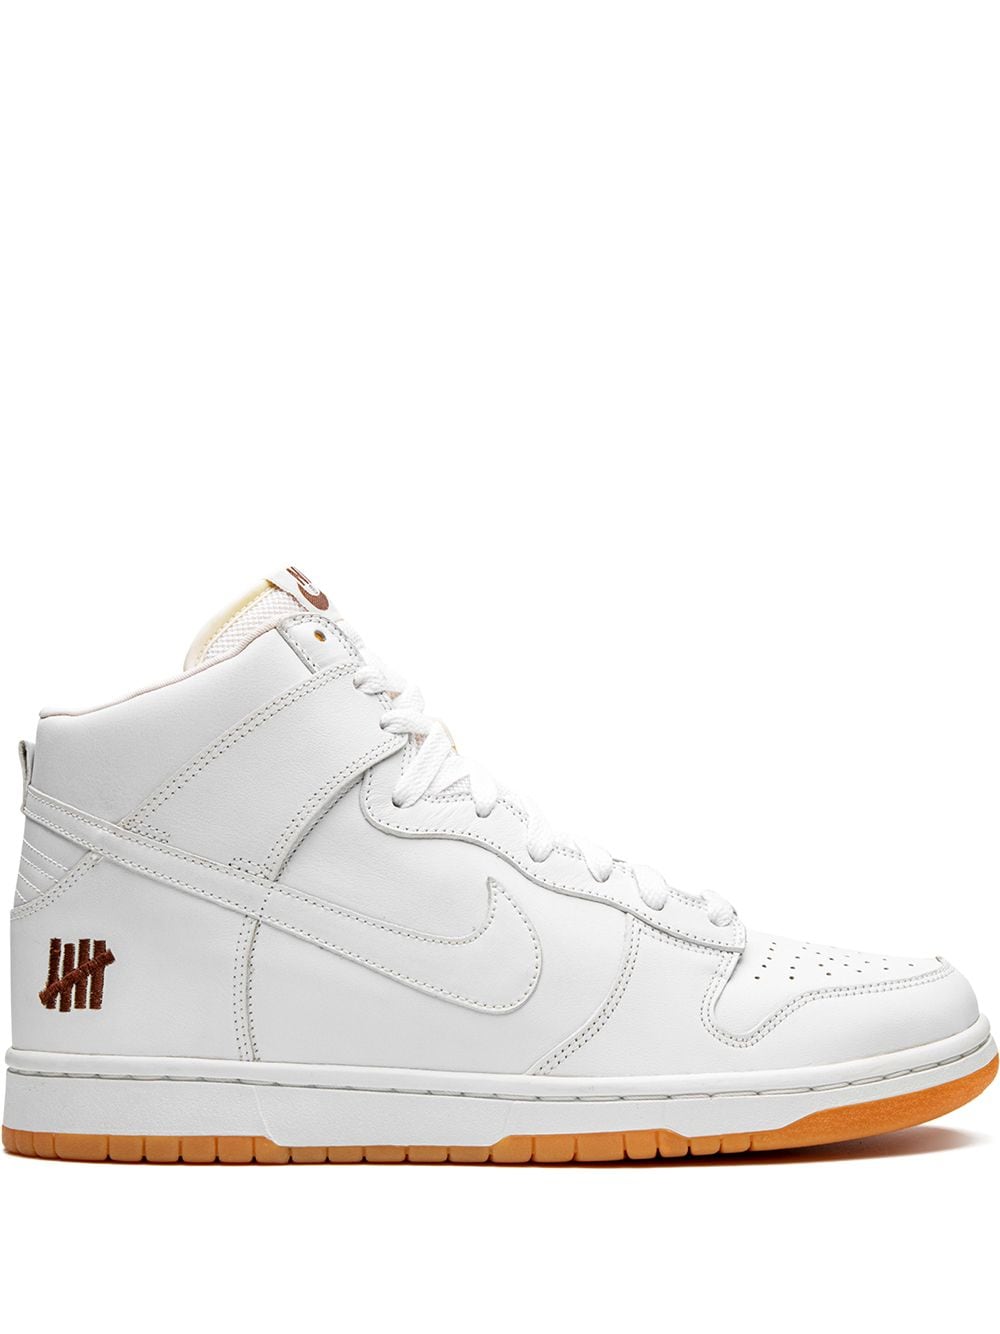 Nike x Undefeated Dunk CL Hitop Men "Dunk Sample" sneakers - White von Nike